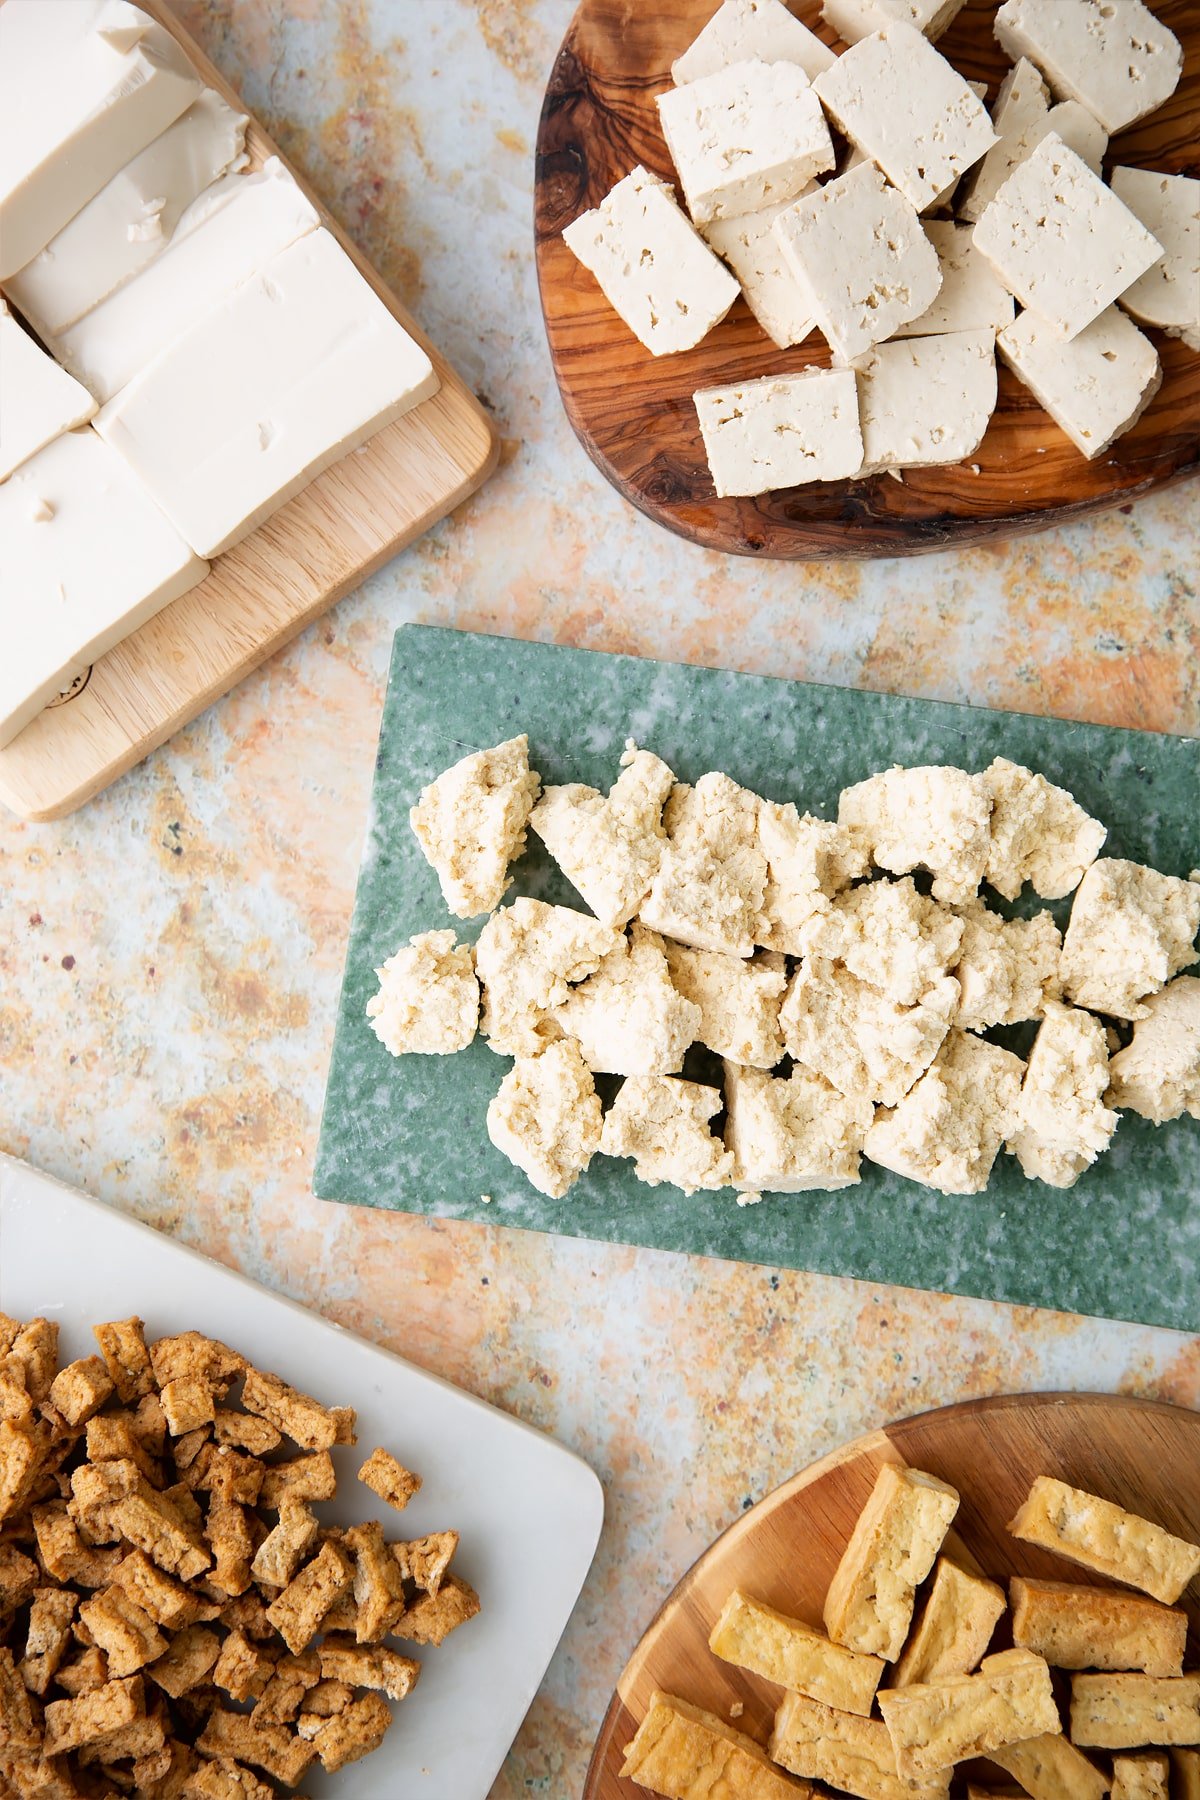 a trio of marble and wooden boards topped with cubed and crumbled tofu.